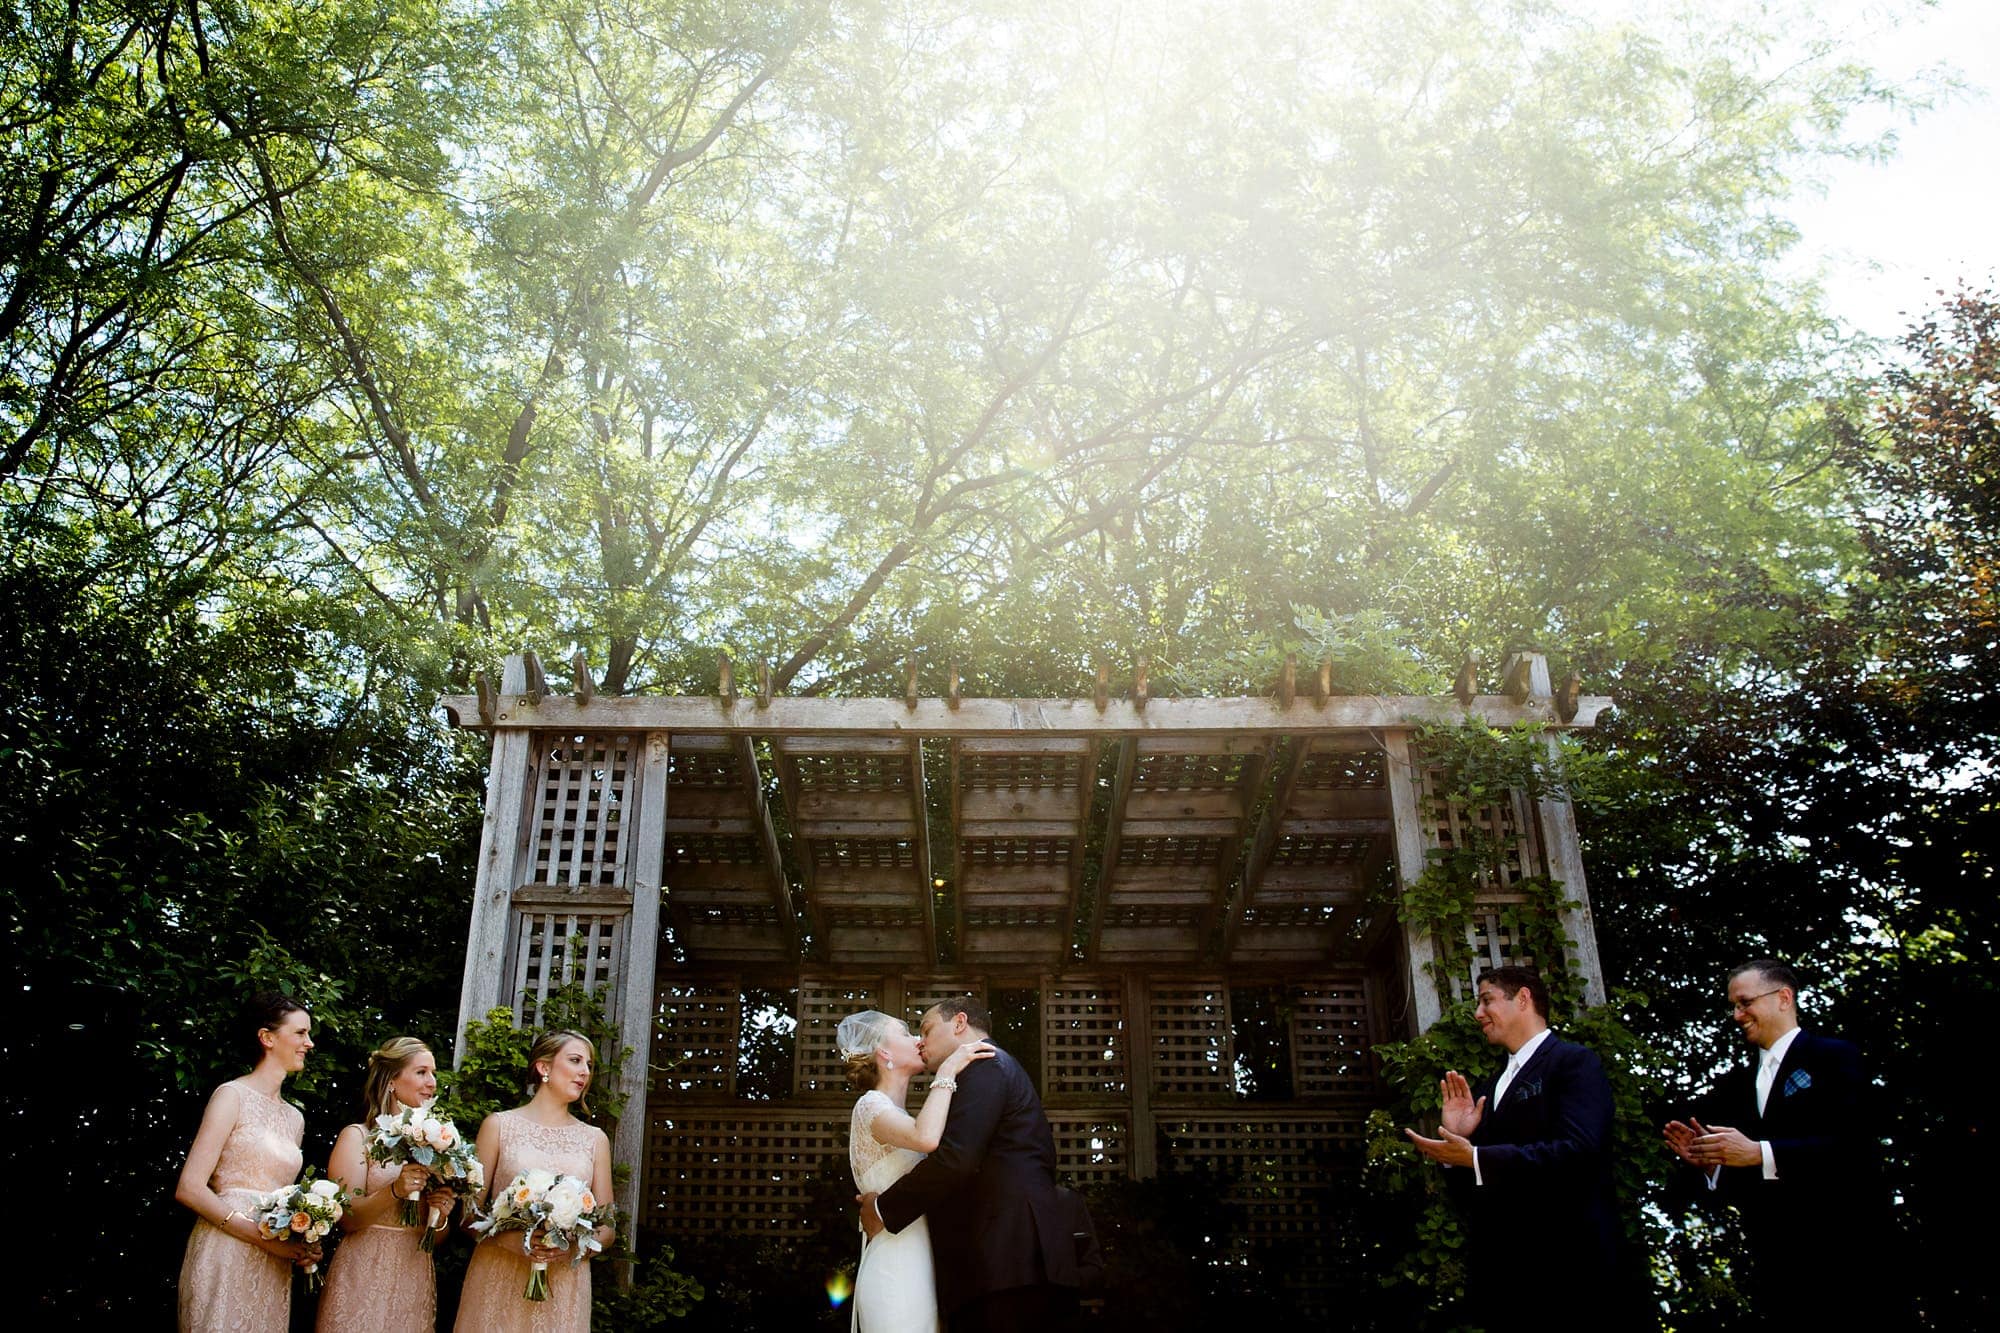 A groom kisses hits bride for the first time under the arbor outside during their morning wedding at Galleria Marchetti in Chicago, Illinois.